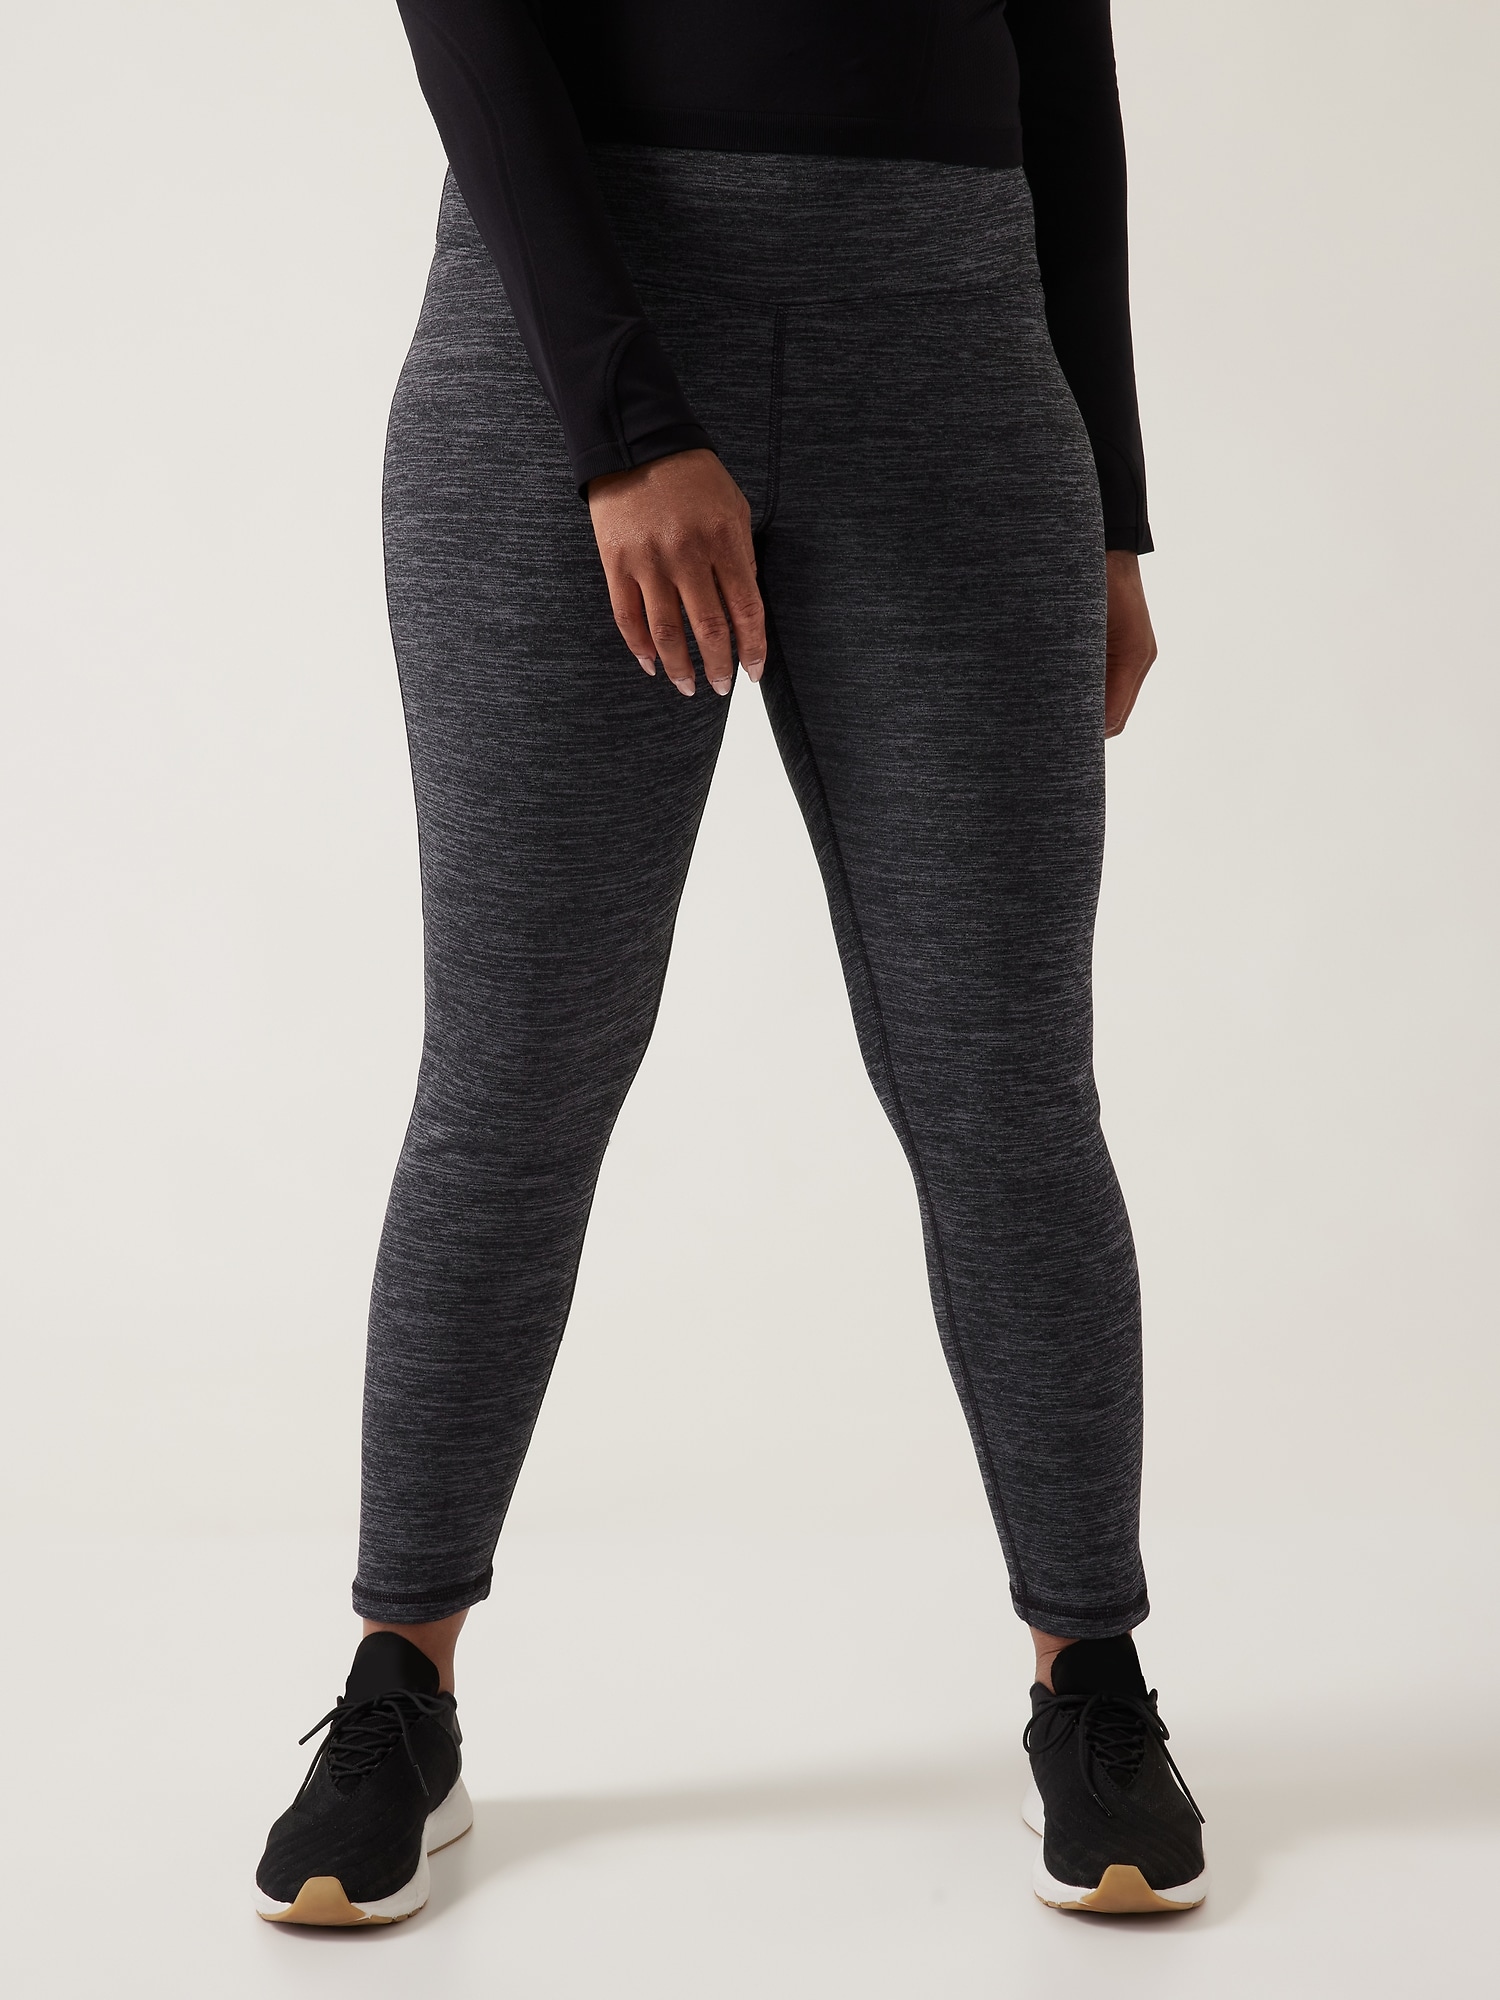 LULULEMON Women's Jet Pant 27 Inseam Wee Are From Space Dark